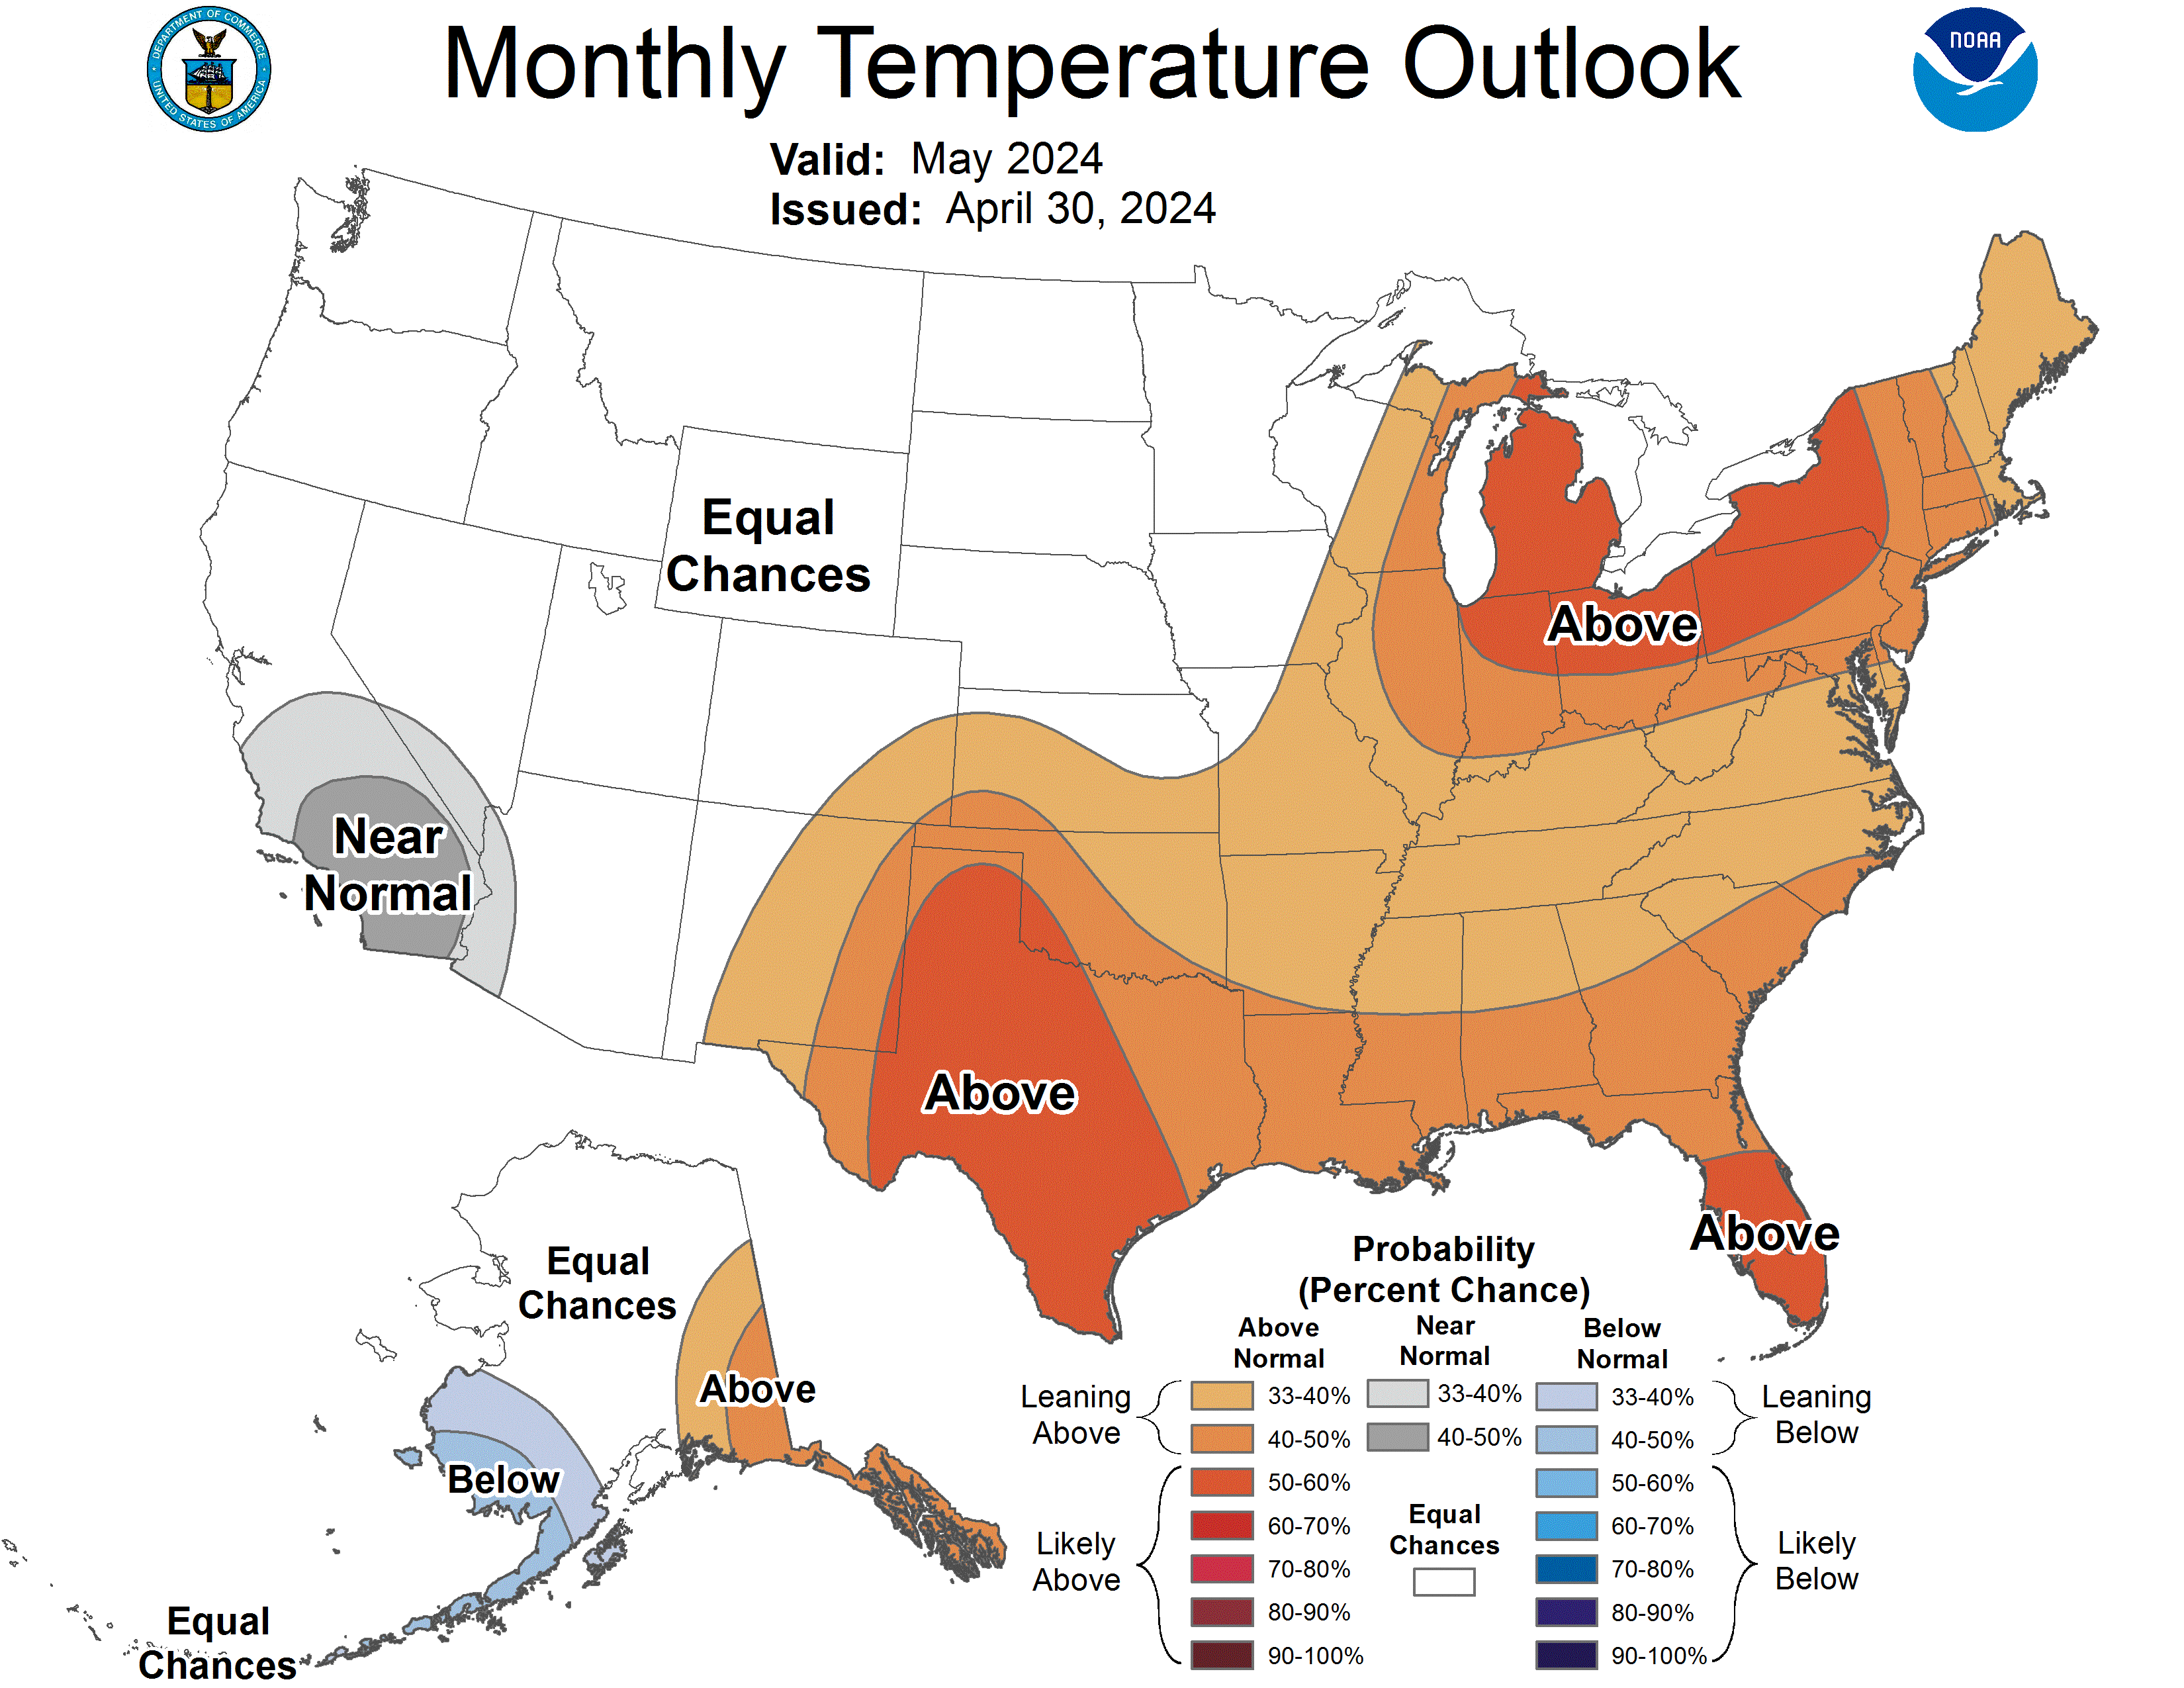 One Month Outlook Temperature